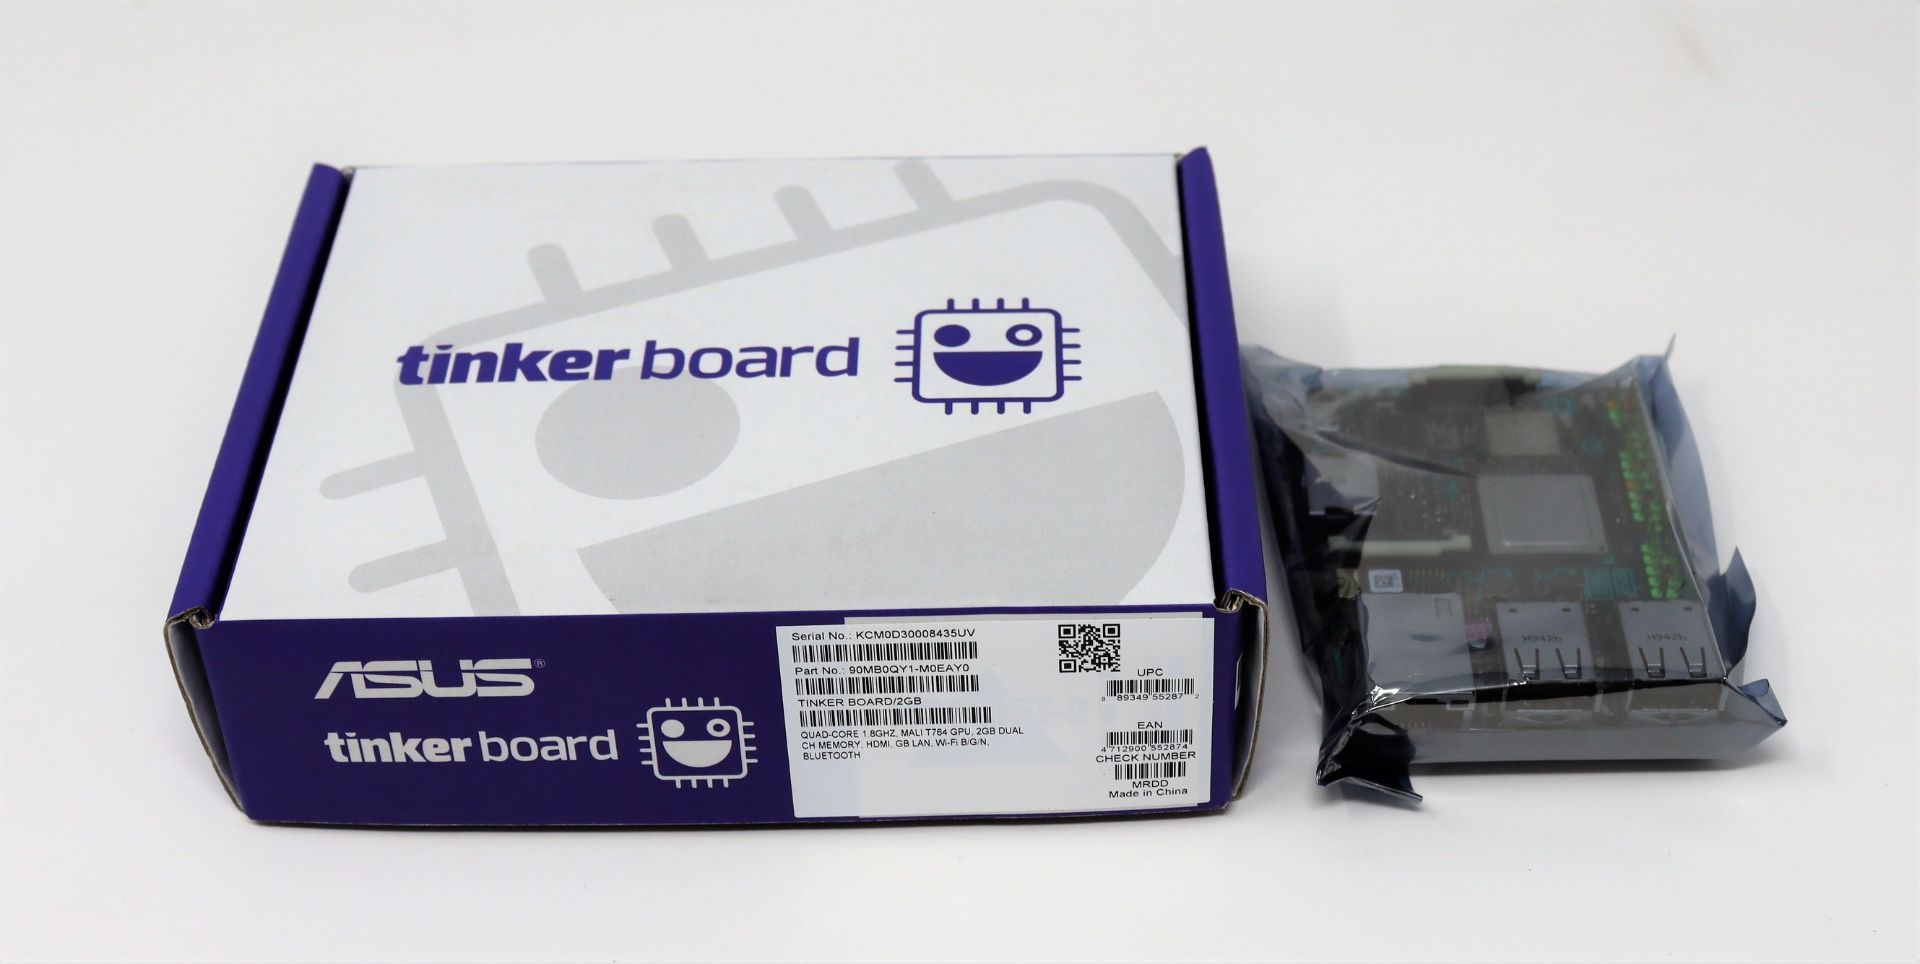 Two boxed as new Asus Tinker Board 2GB (P/N: 90MB0QY1-M0EAY0).